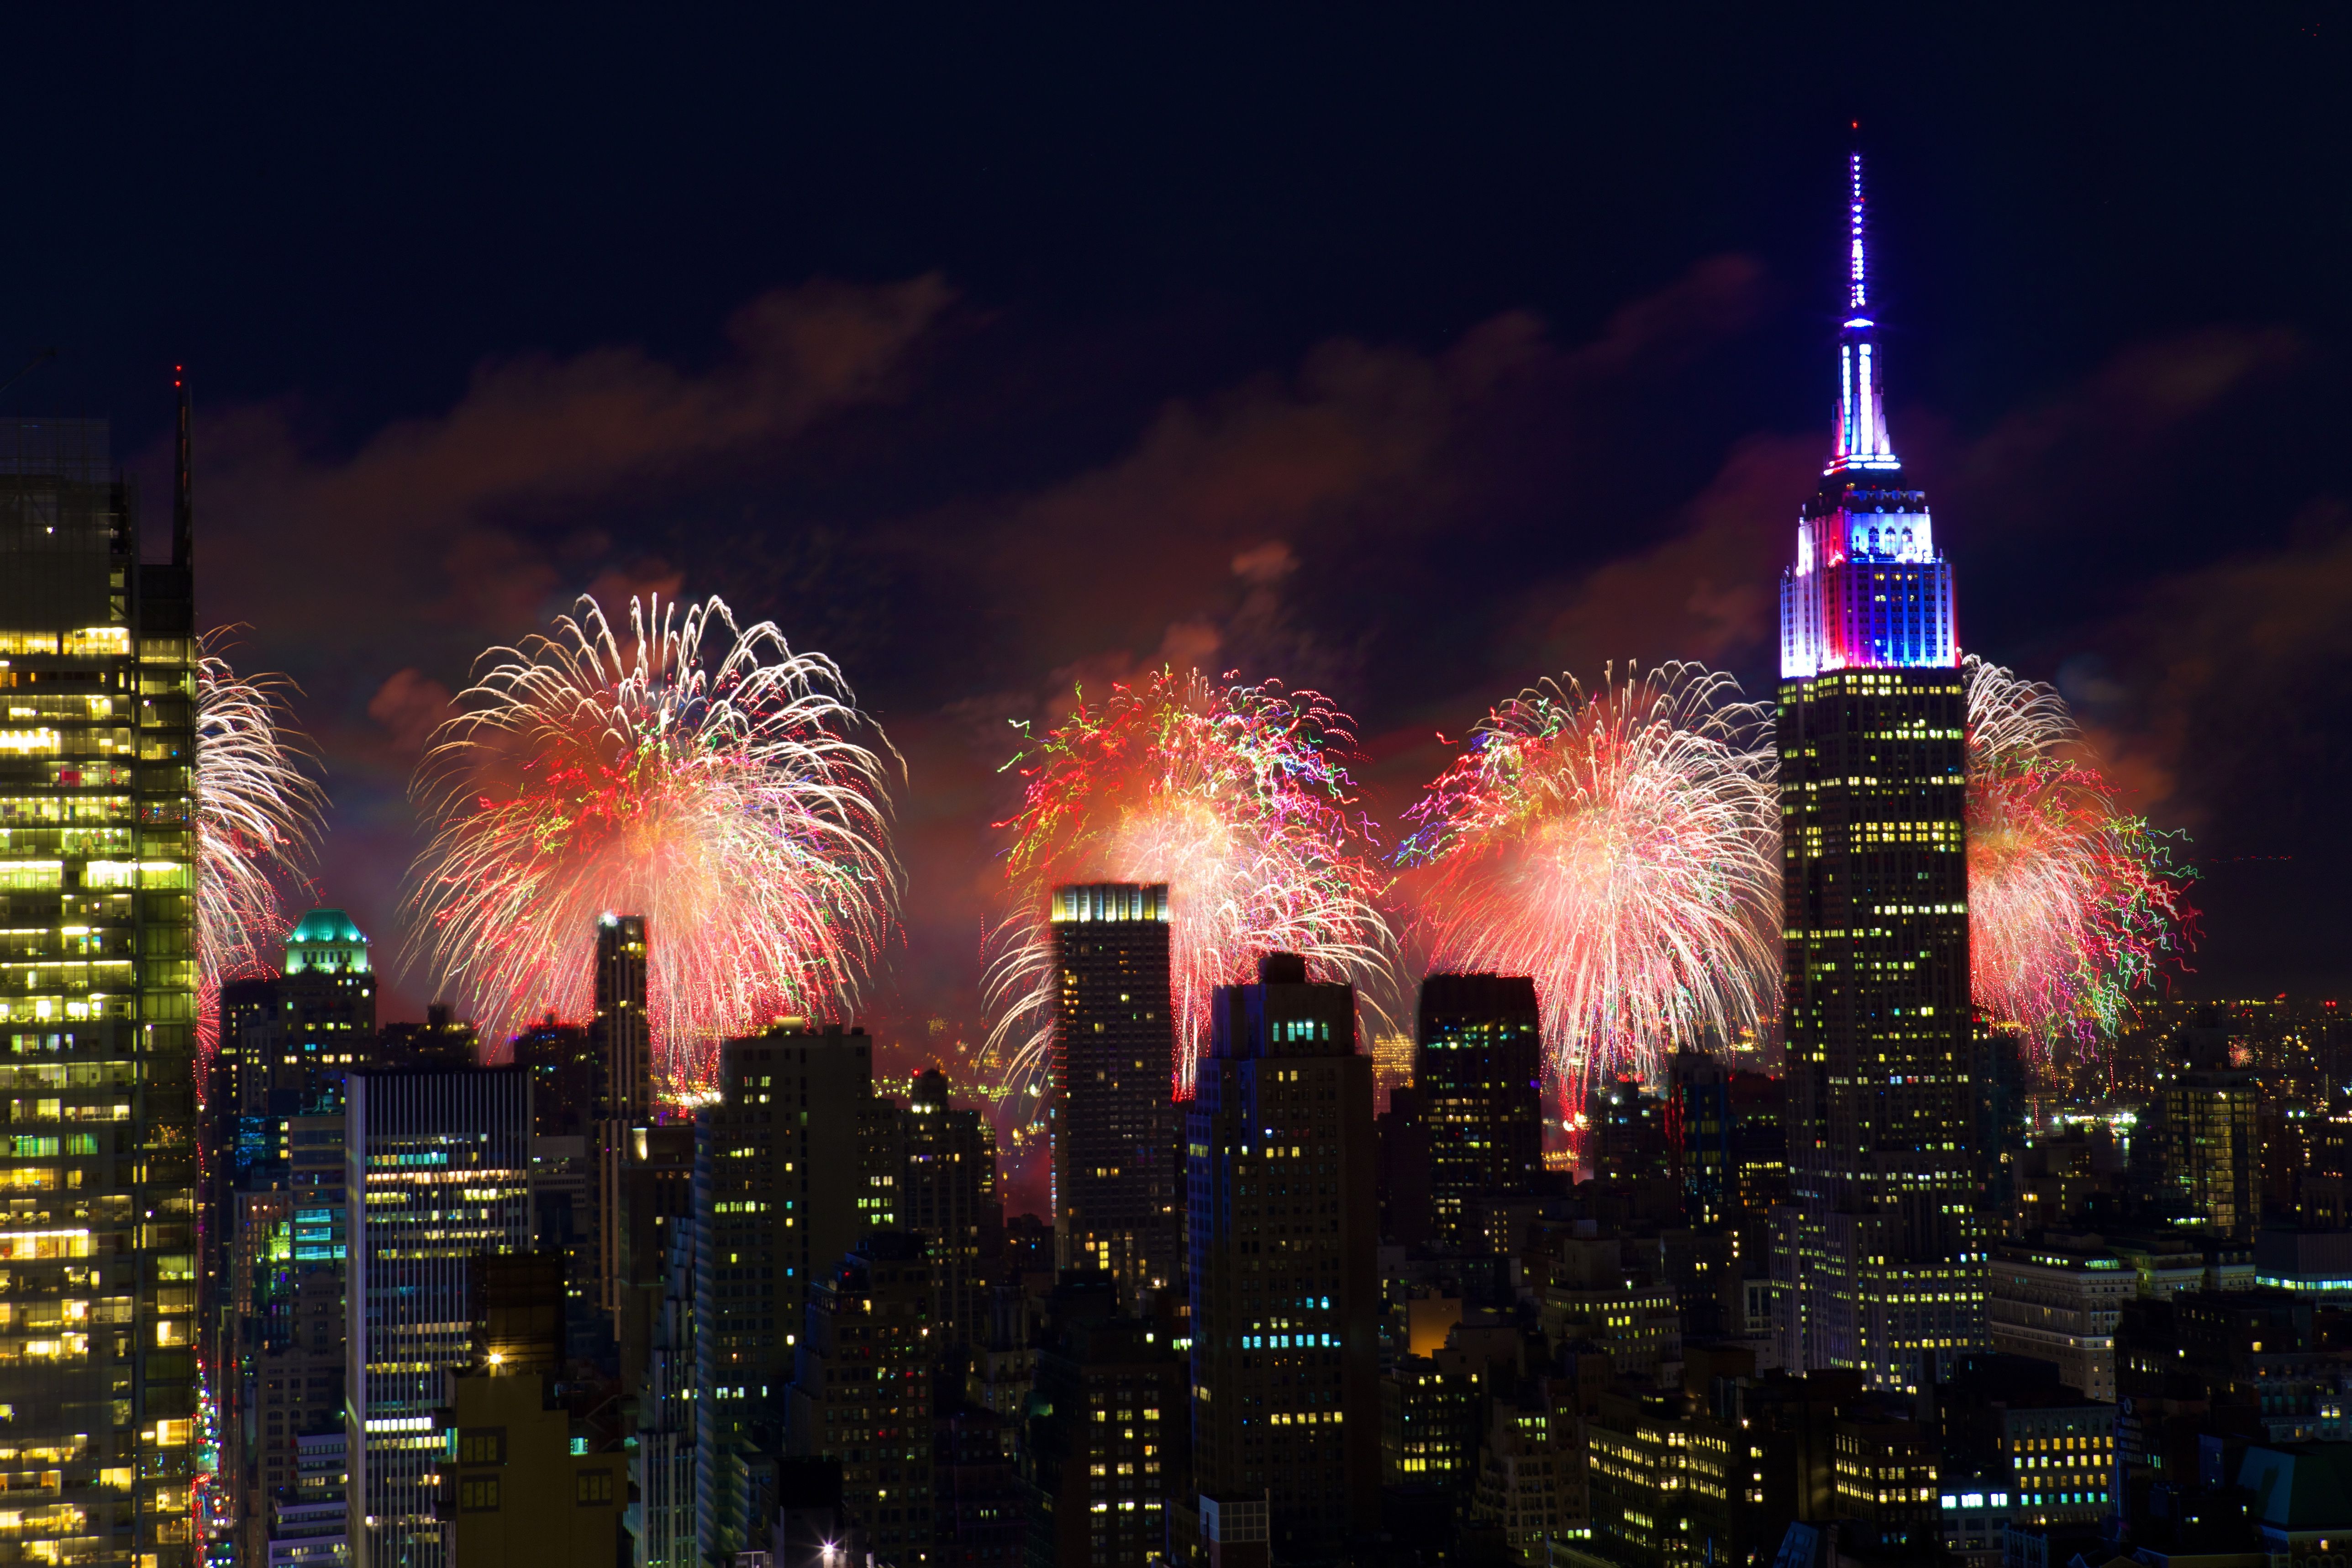 TipsForTravelers » Happy 4th of July, from New York City!